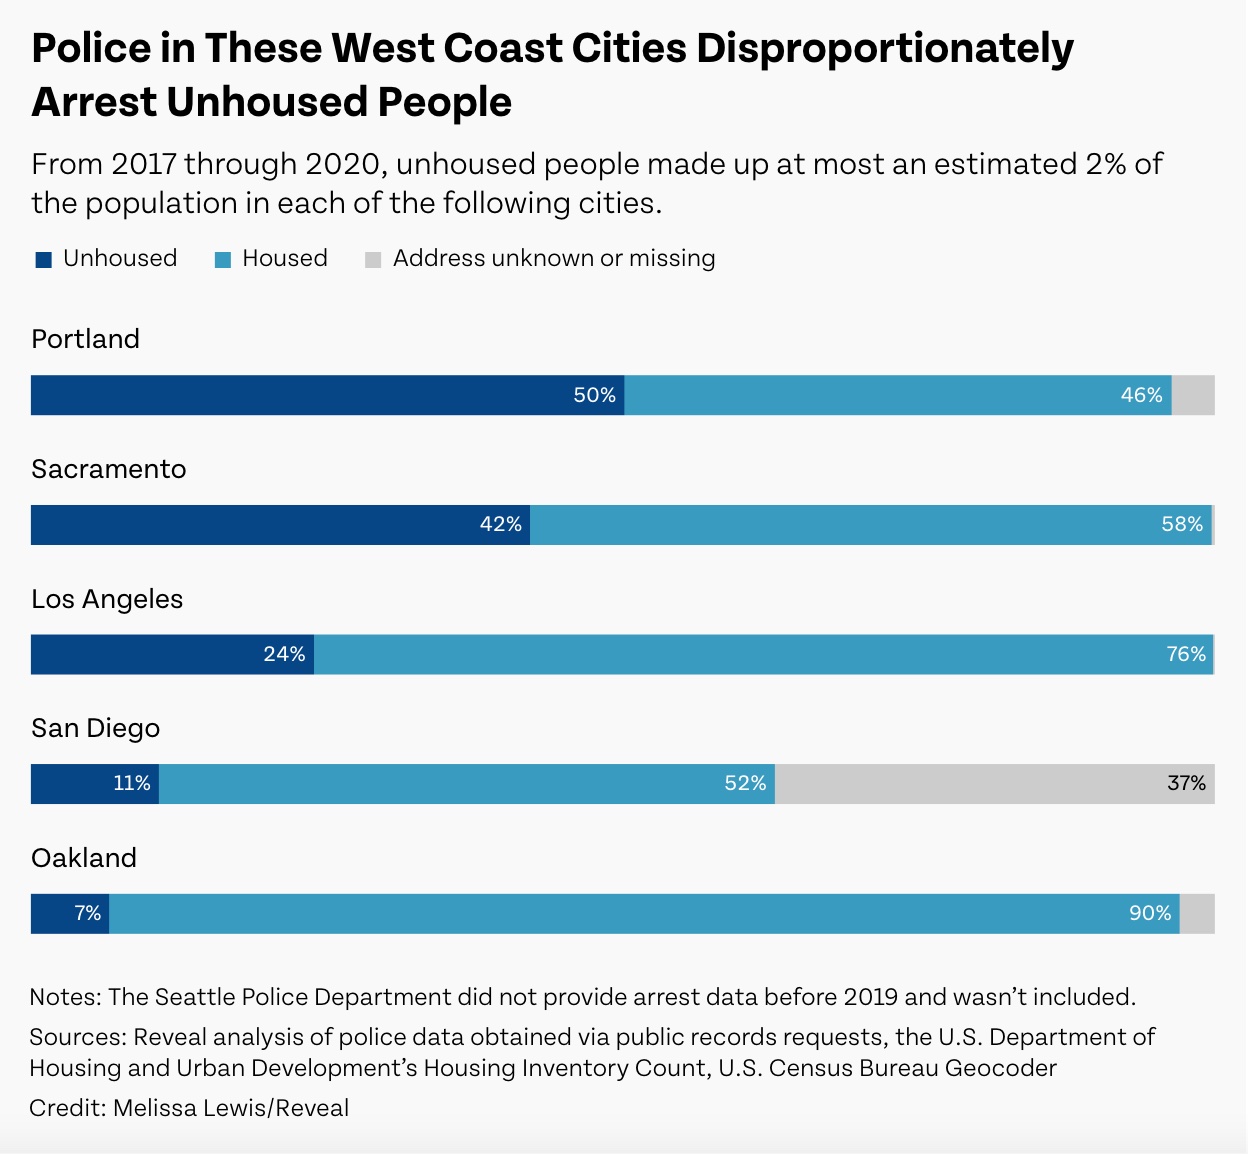 A bar chart titled, "Police in These West Coast Cities Disproportionately Arrest Unhoused People" below the title it says, "From 2017 through 2020, unhoused people made up at most an estimated 2% of the population in each of the following cities." 